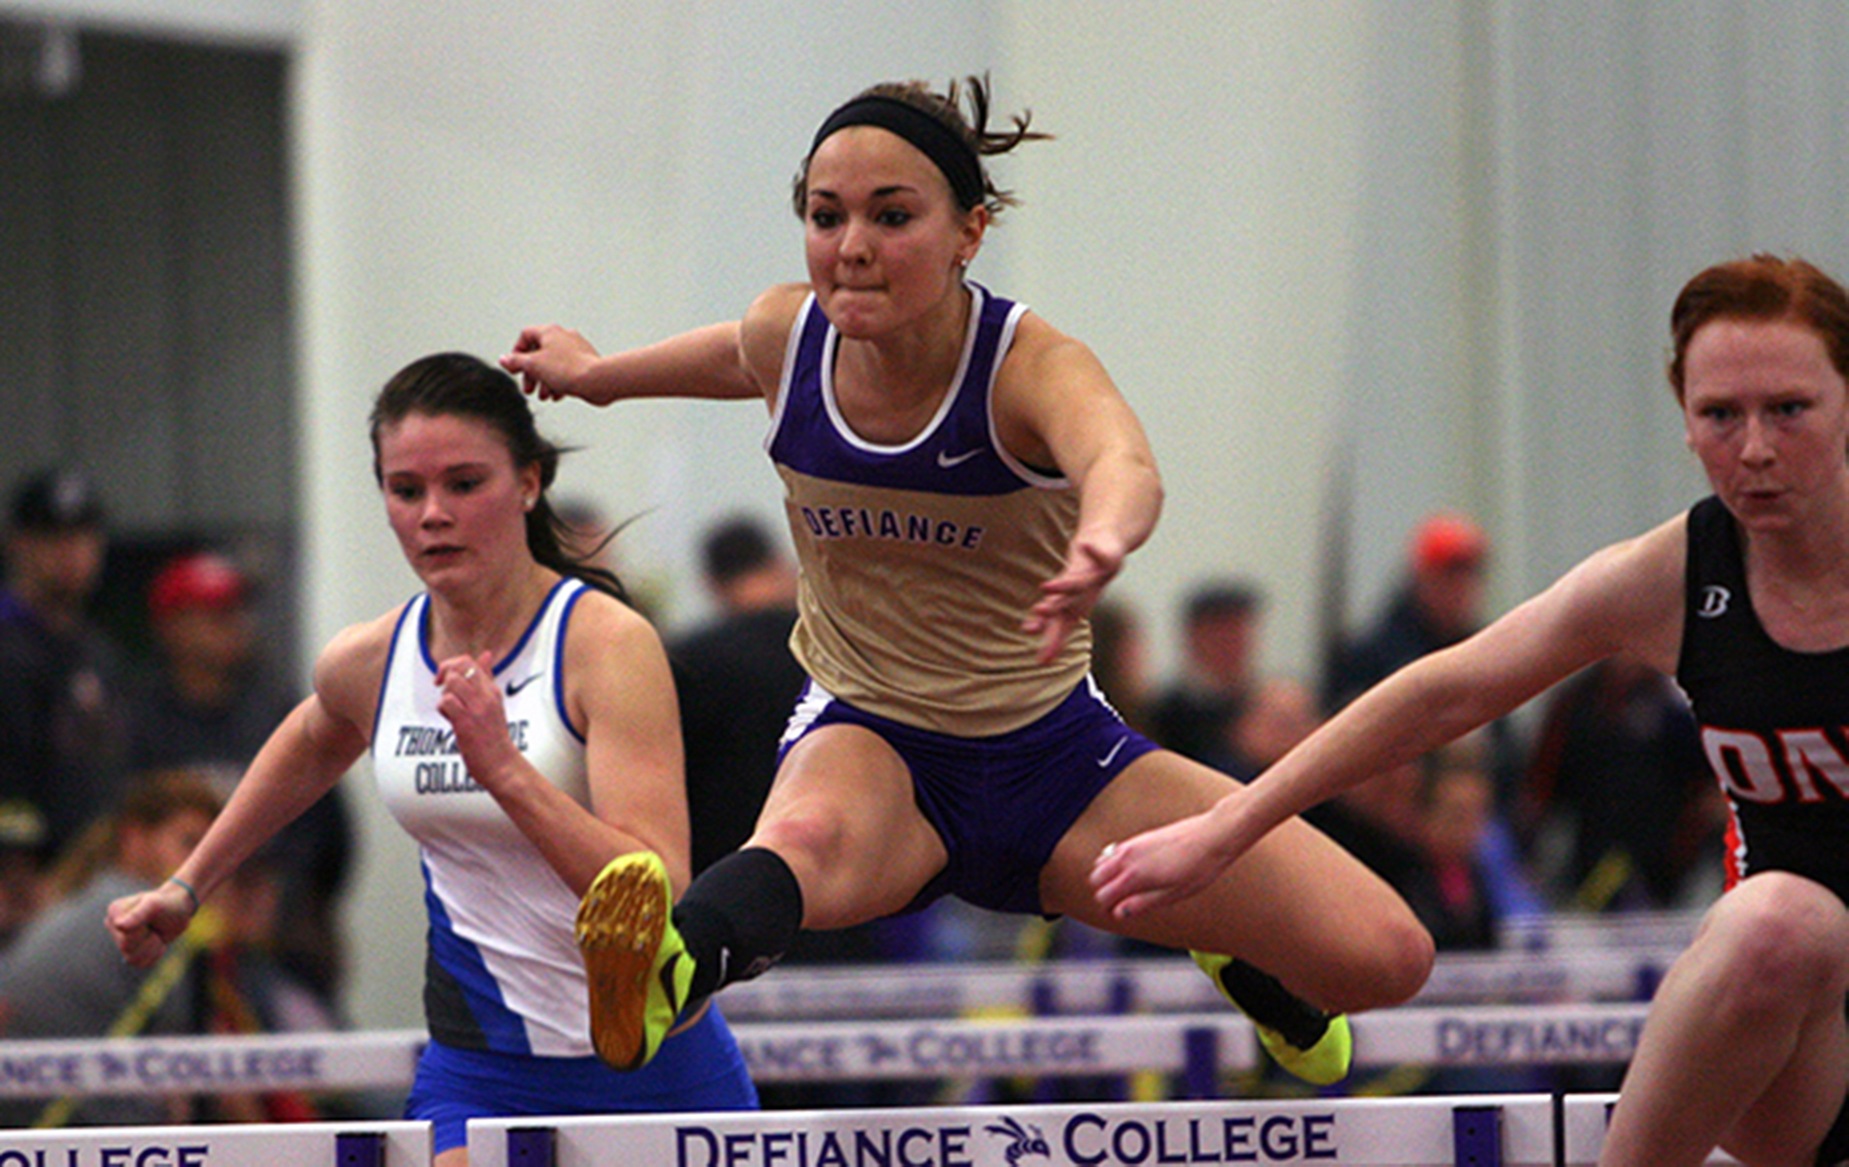 Anderson Competes at ONU Last Chance Meet